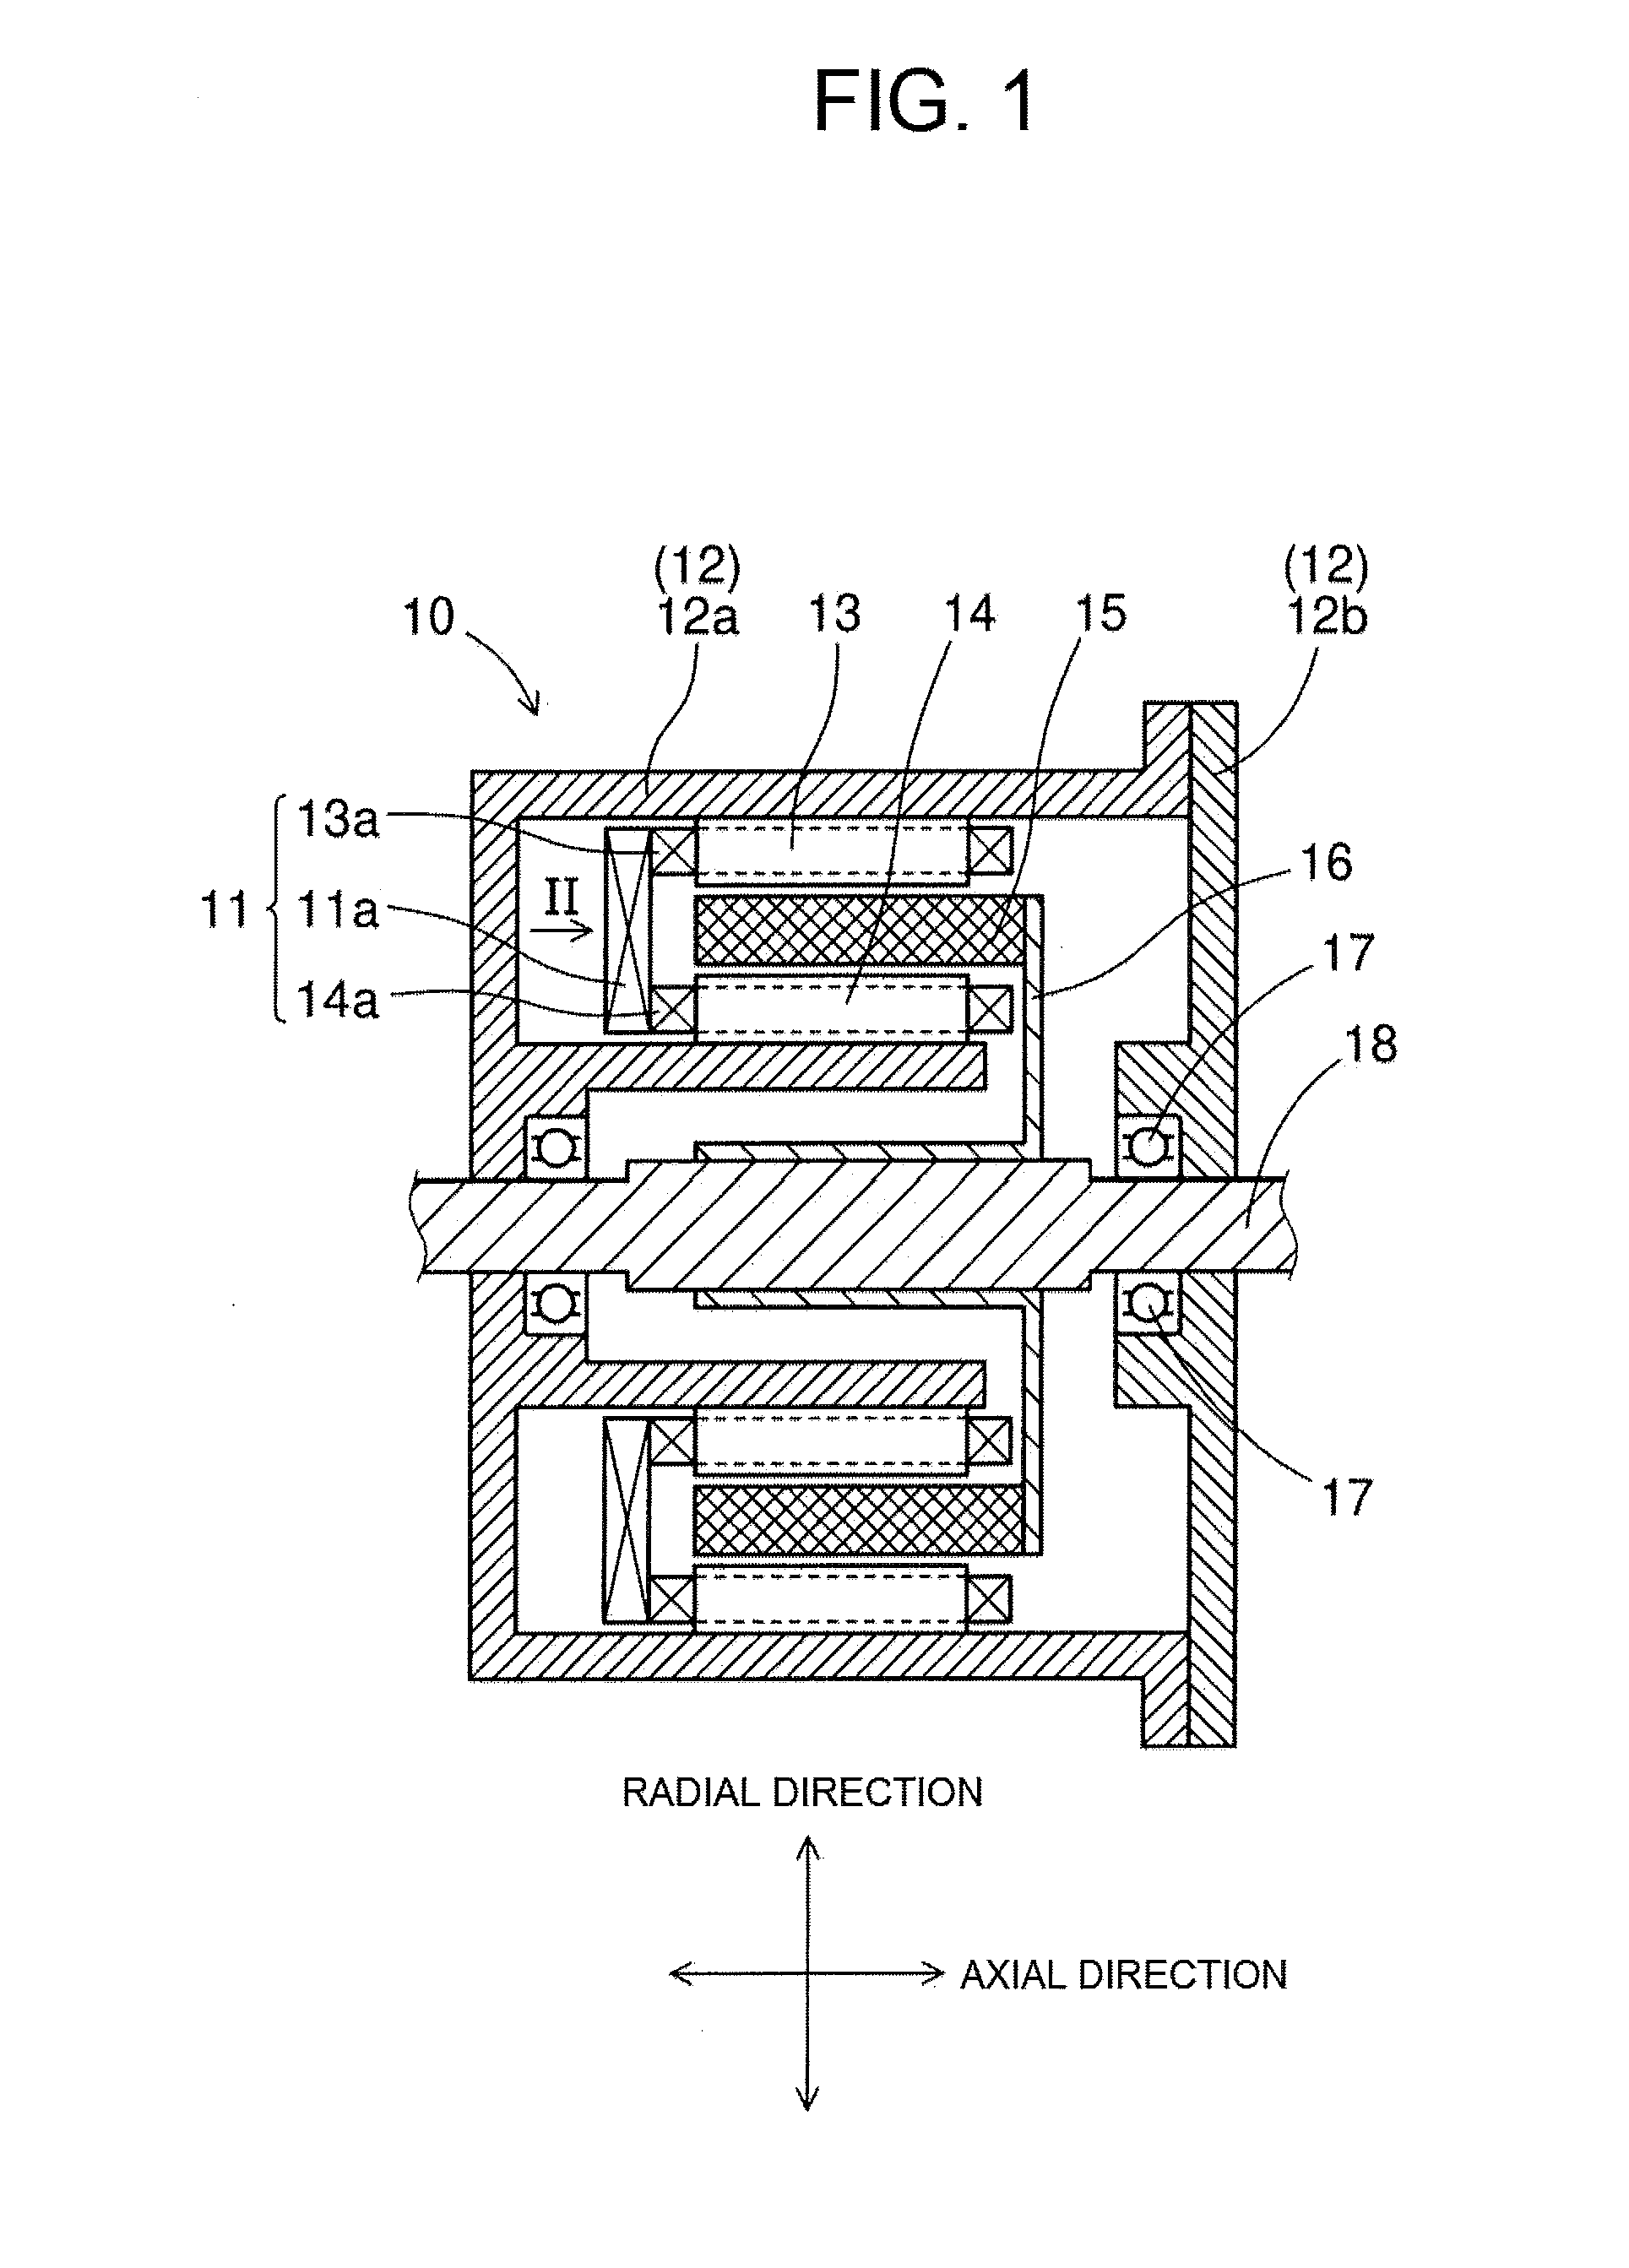 Double-stator rotating electric machine